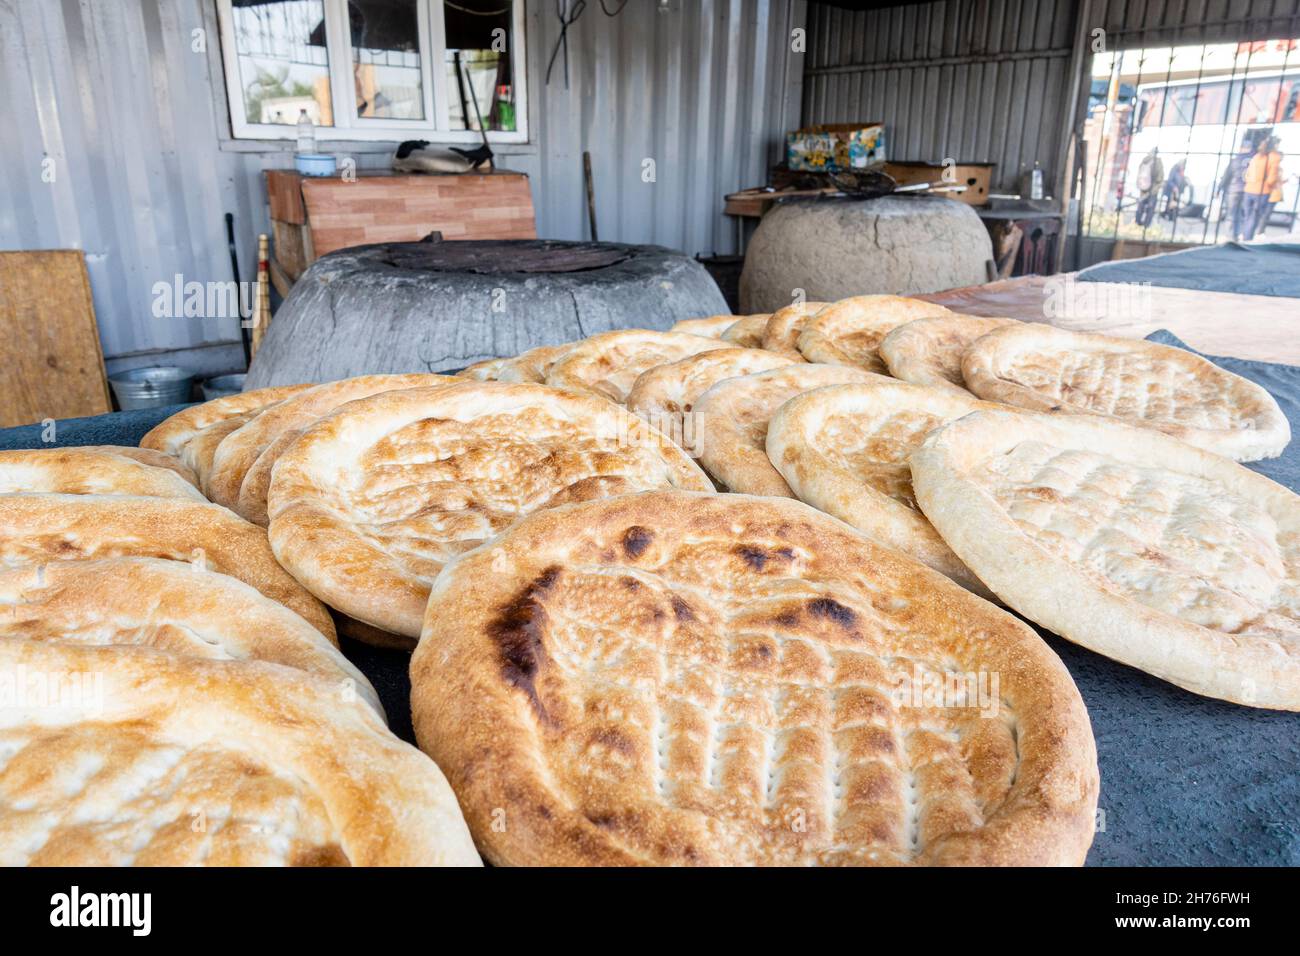 Tamdyr or tandyr- traditional round bread cooked in round ovens sold in Central Asia. near Almaty, Kazakhstan Stock Photo